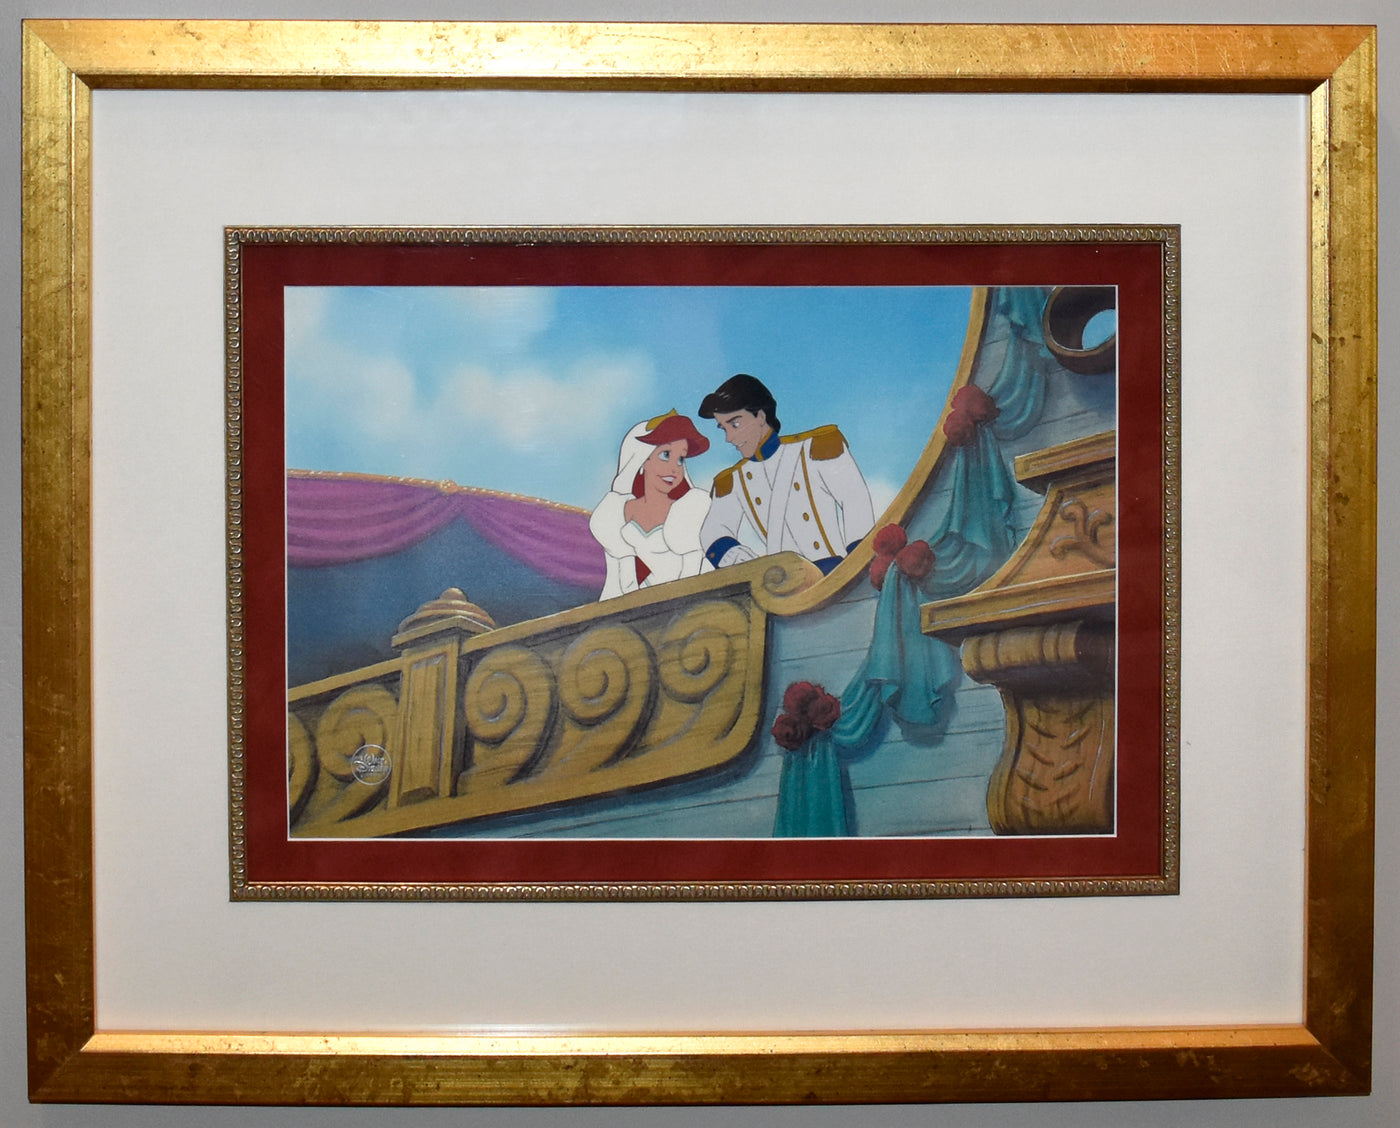 Original Walt Disney Production Cel from The Little Mermaid featuring Ariel and Eric